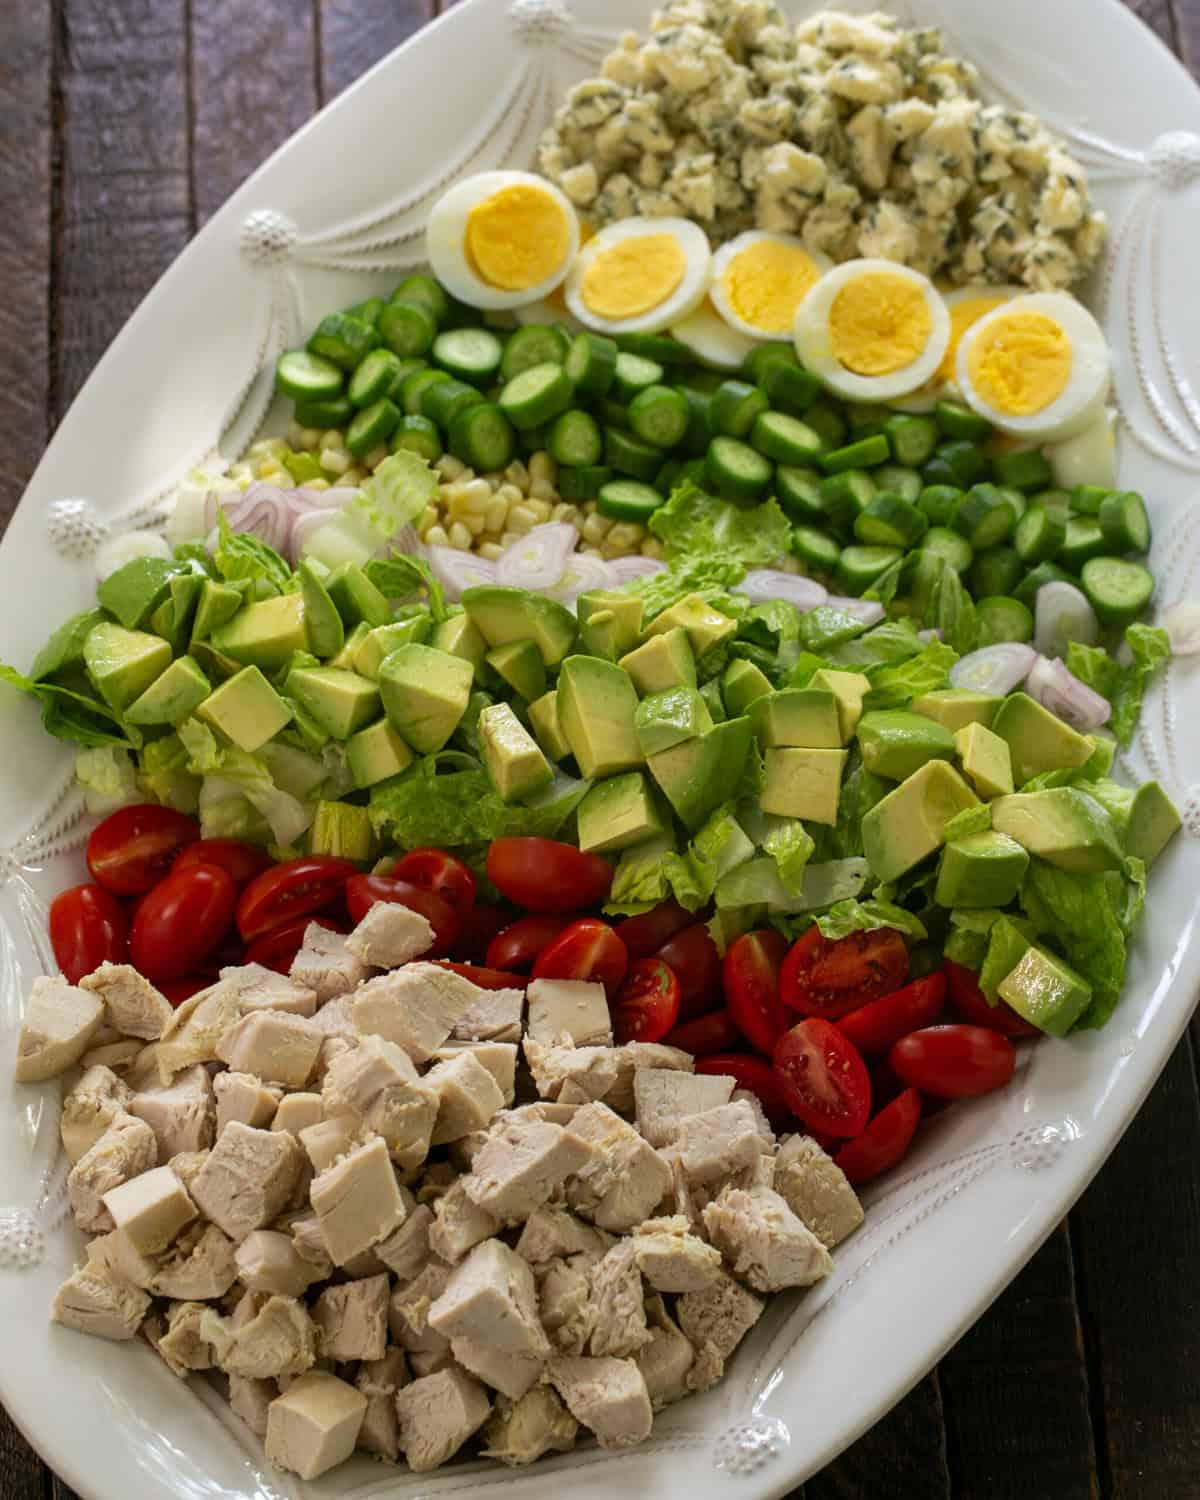 Overhead view of a composed Cobb salad on a white serving plate.